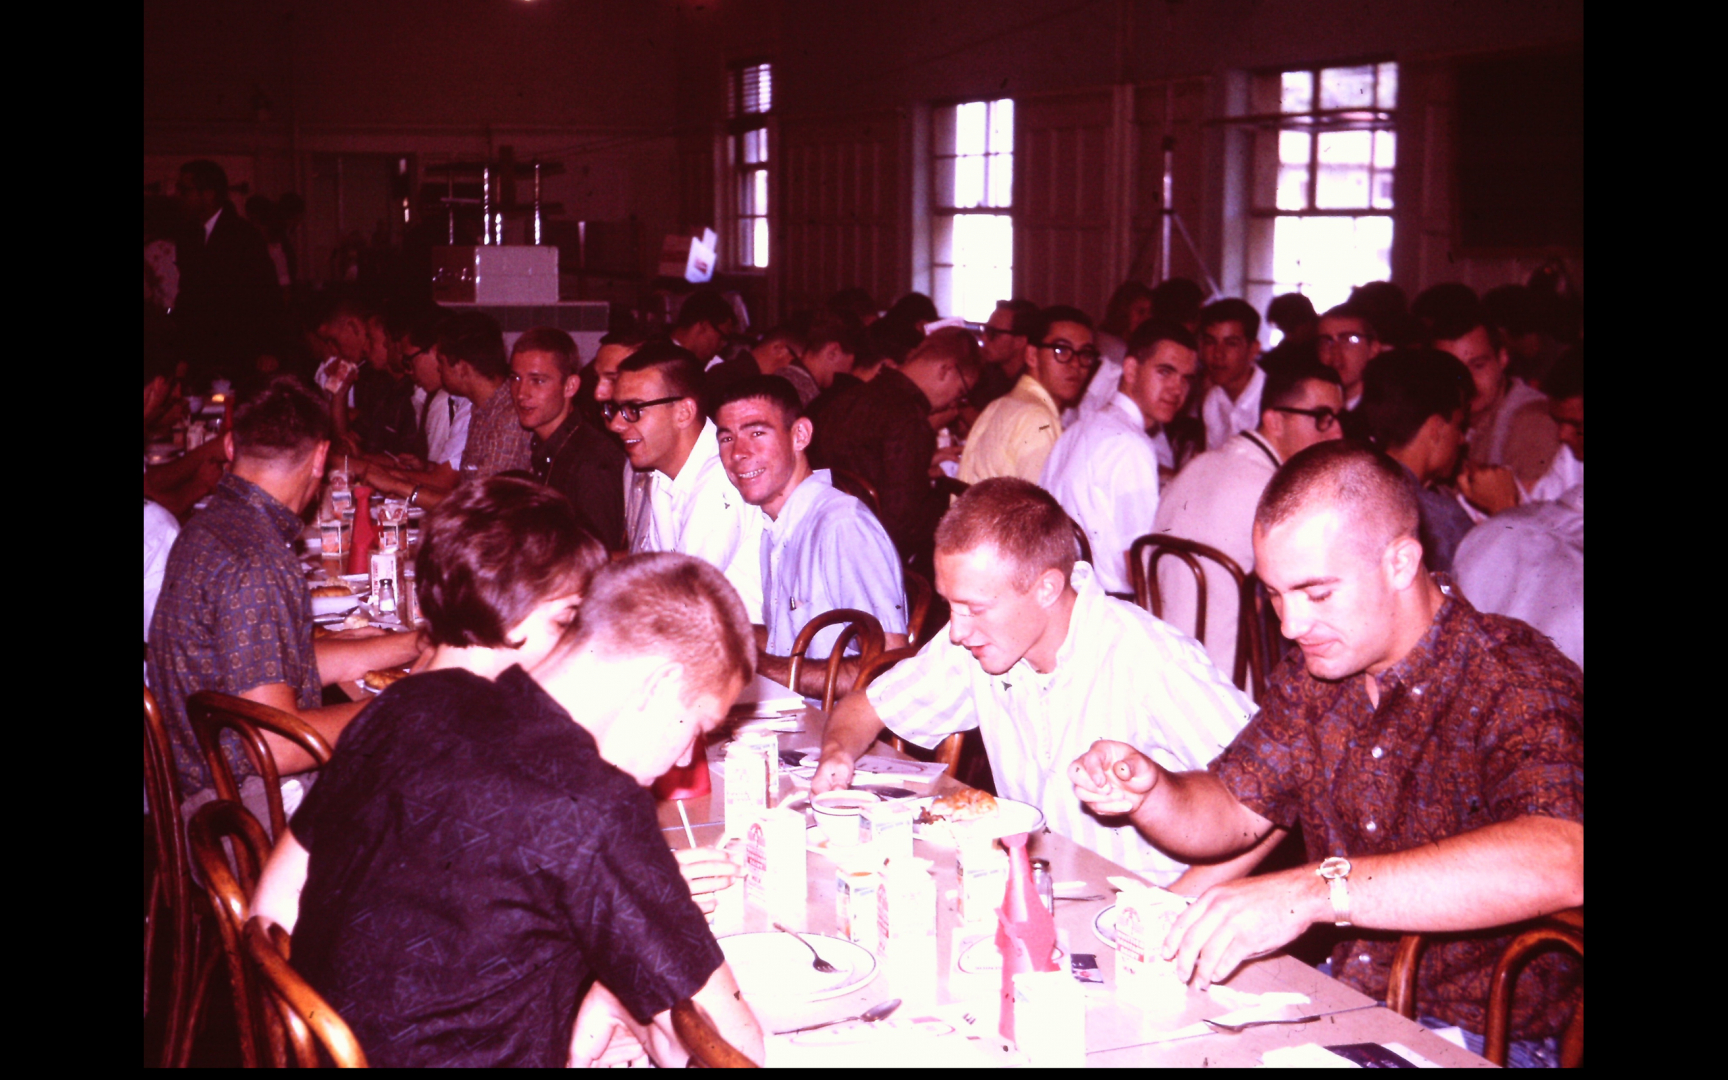 Ted (Fred) Wile is in the white shirt and dark framed glasses center left of the picture, Buddy Hamilton (me) is to his left, I think John Maus is across from me, to the right of John is a female and then I think it is Rich Rogers and across from Rich is 